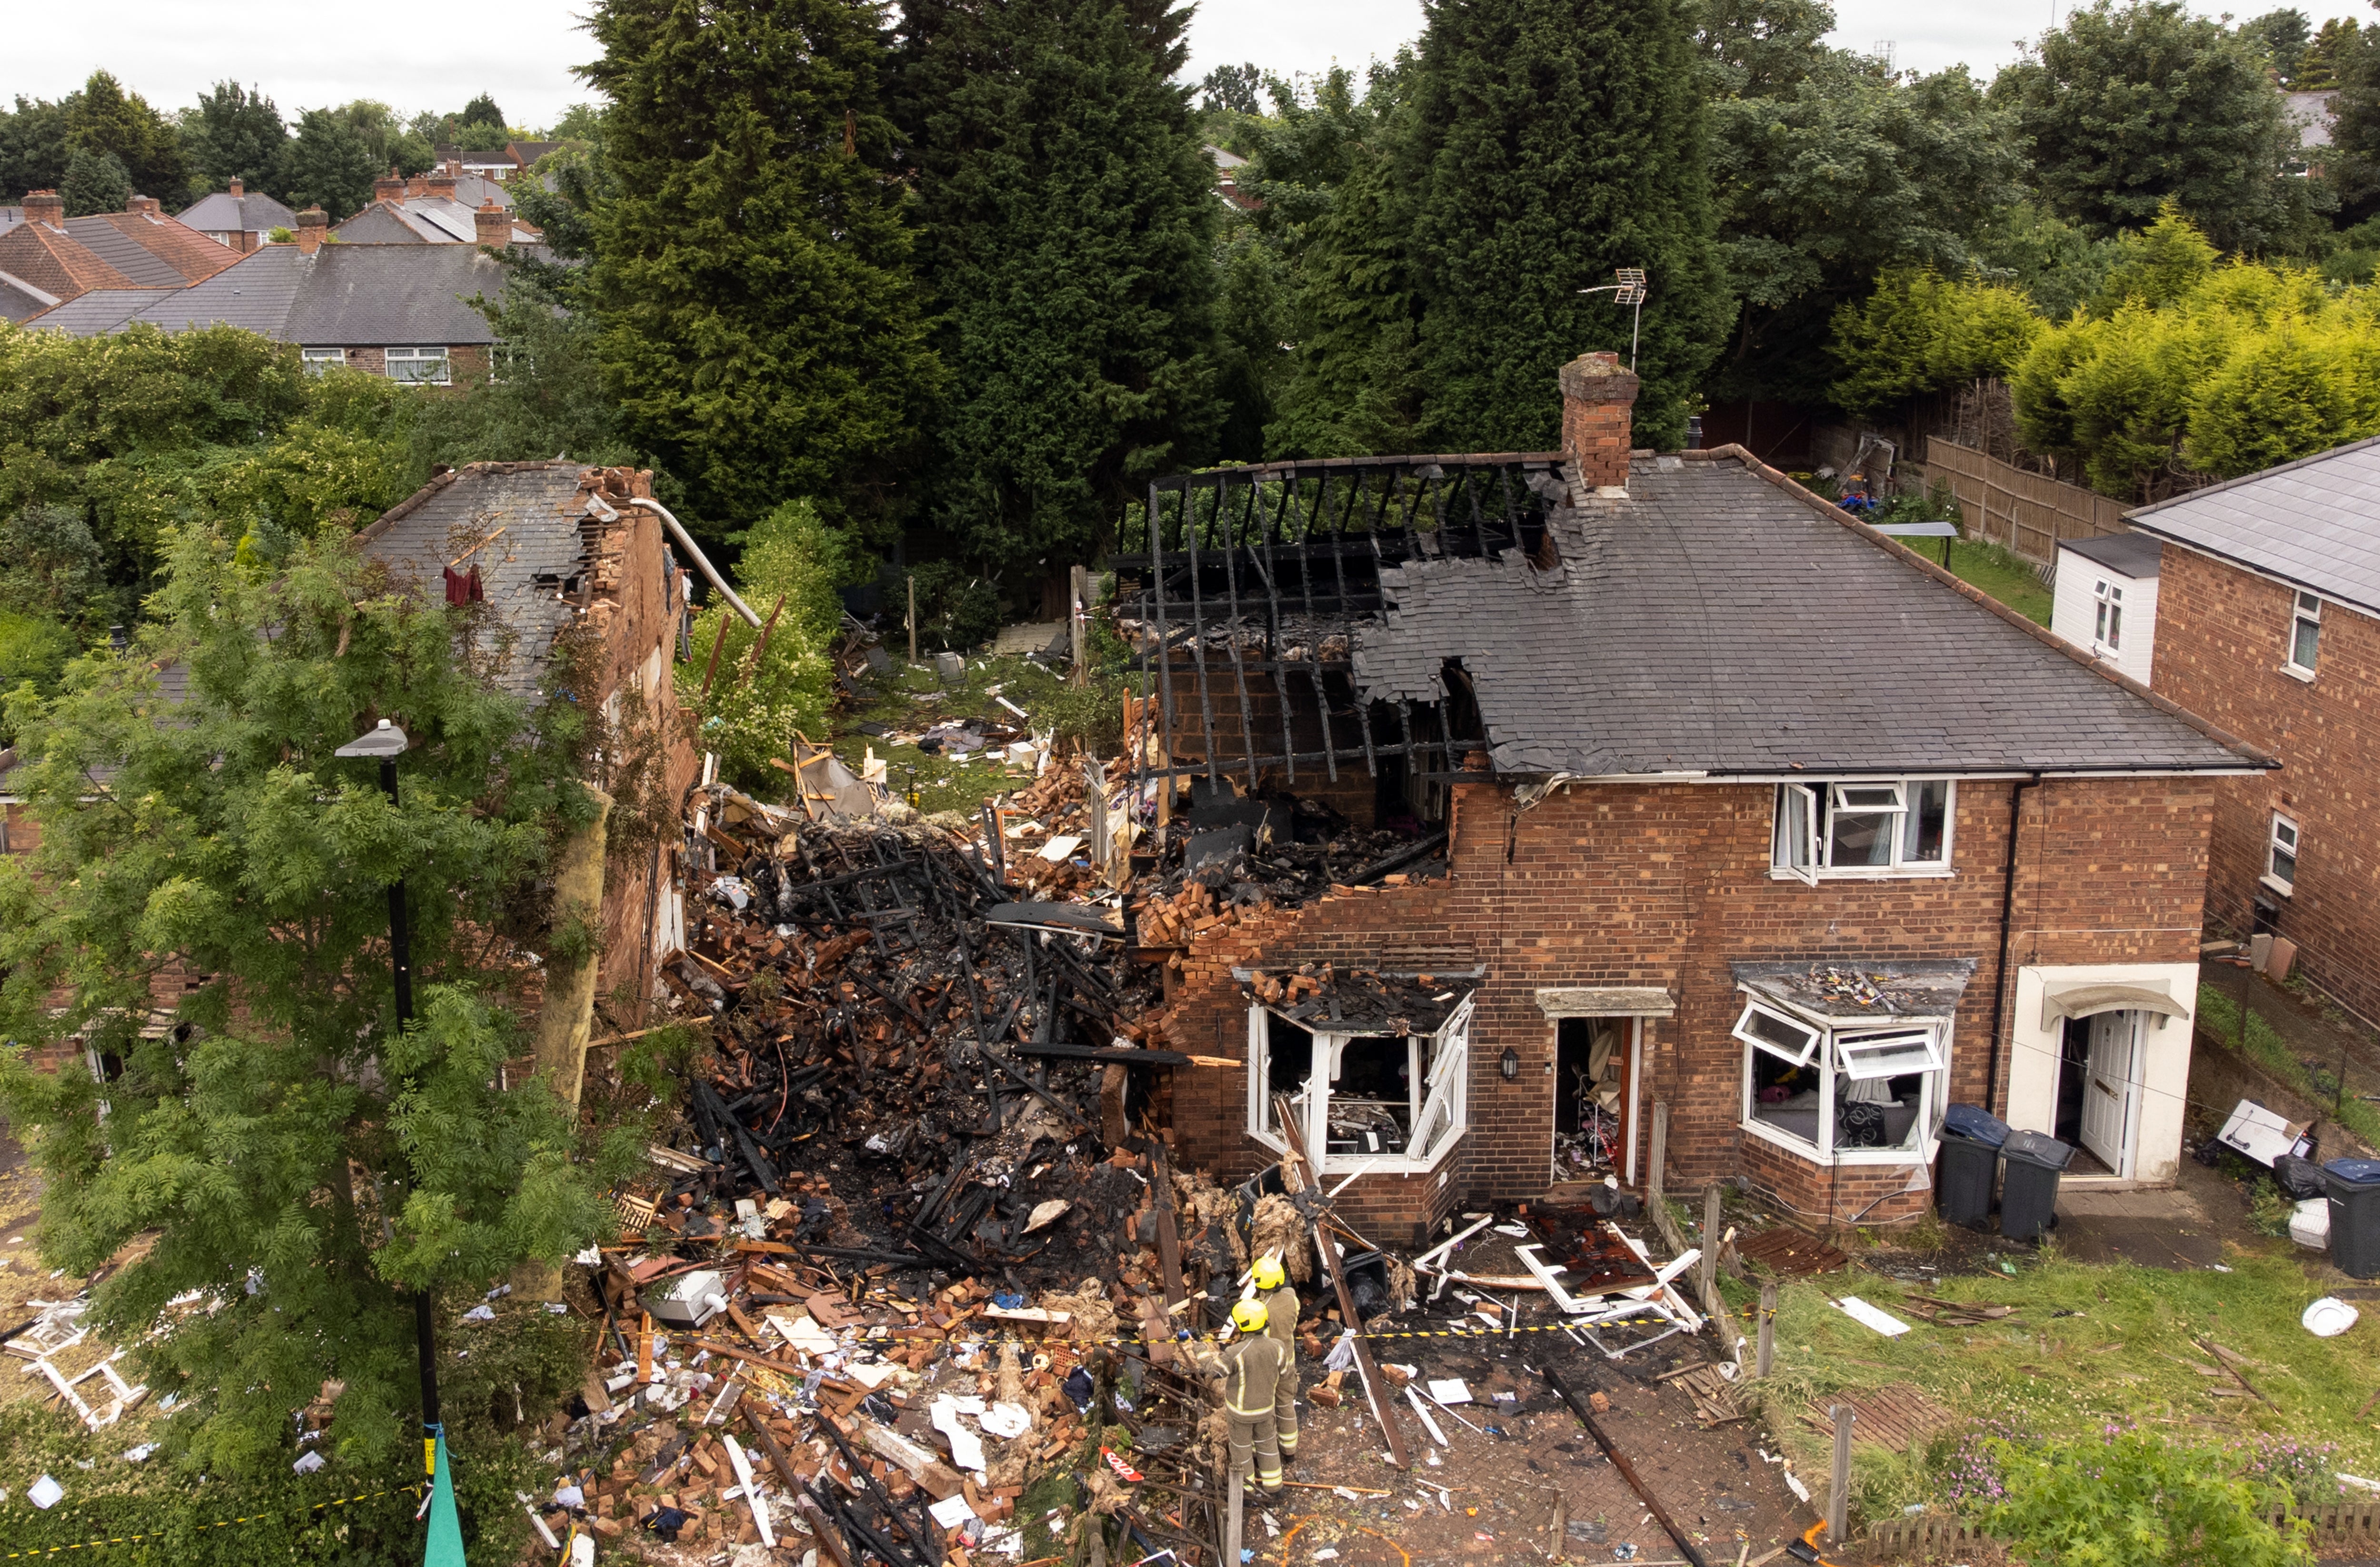 Emergency services at the scene in Dulwich Road, Kingstanding, in Birmingham, where a woman has been found dead after a house was destroyed in a gas explosion. One man rescued from the wreckage remains in hospital in a life-threatening condition. Picture date: Monday June 27, 2022.